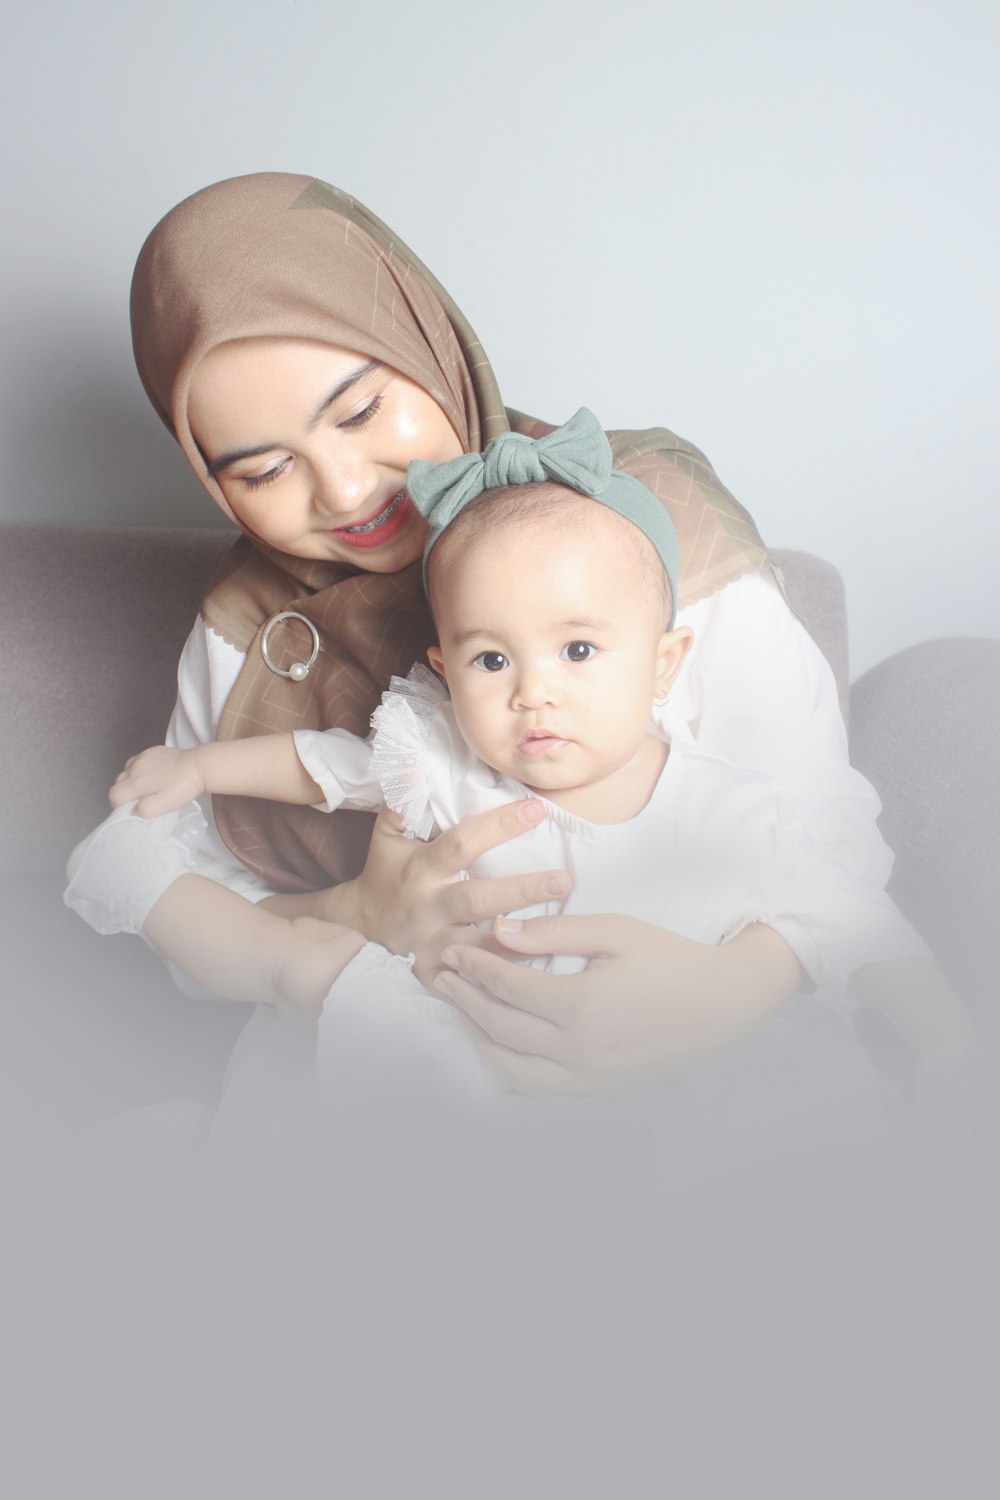 woman in white hijab carrying baby